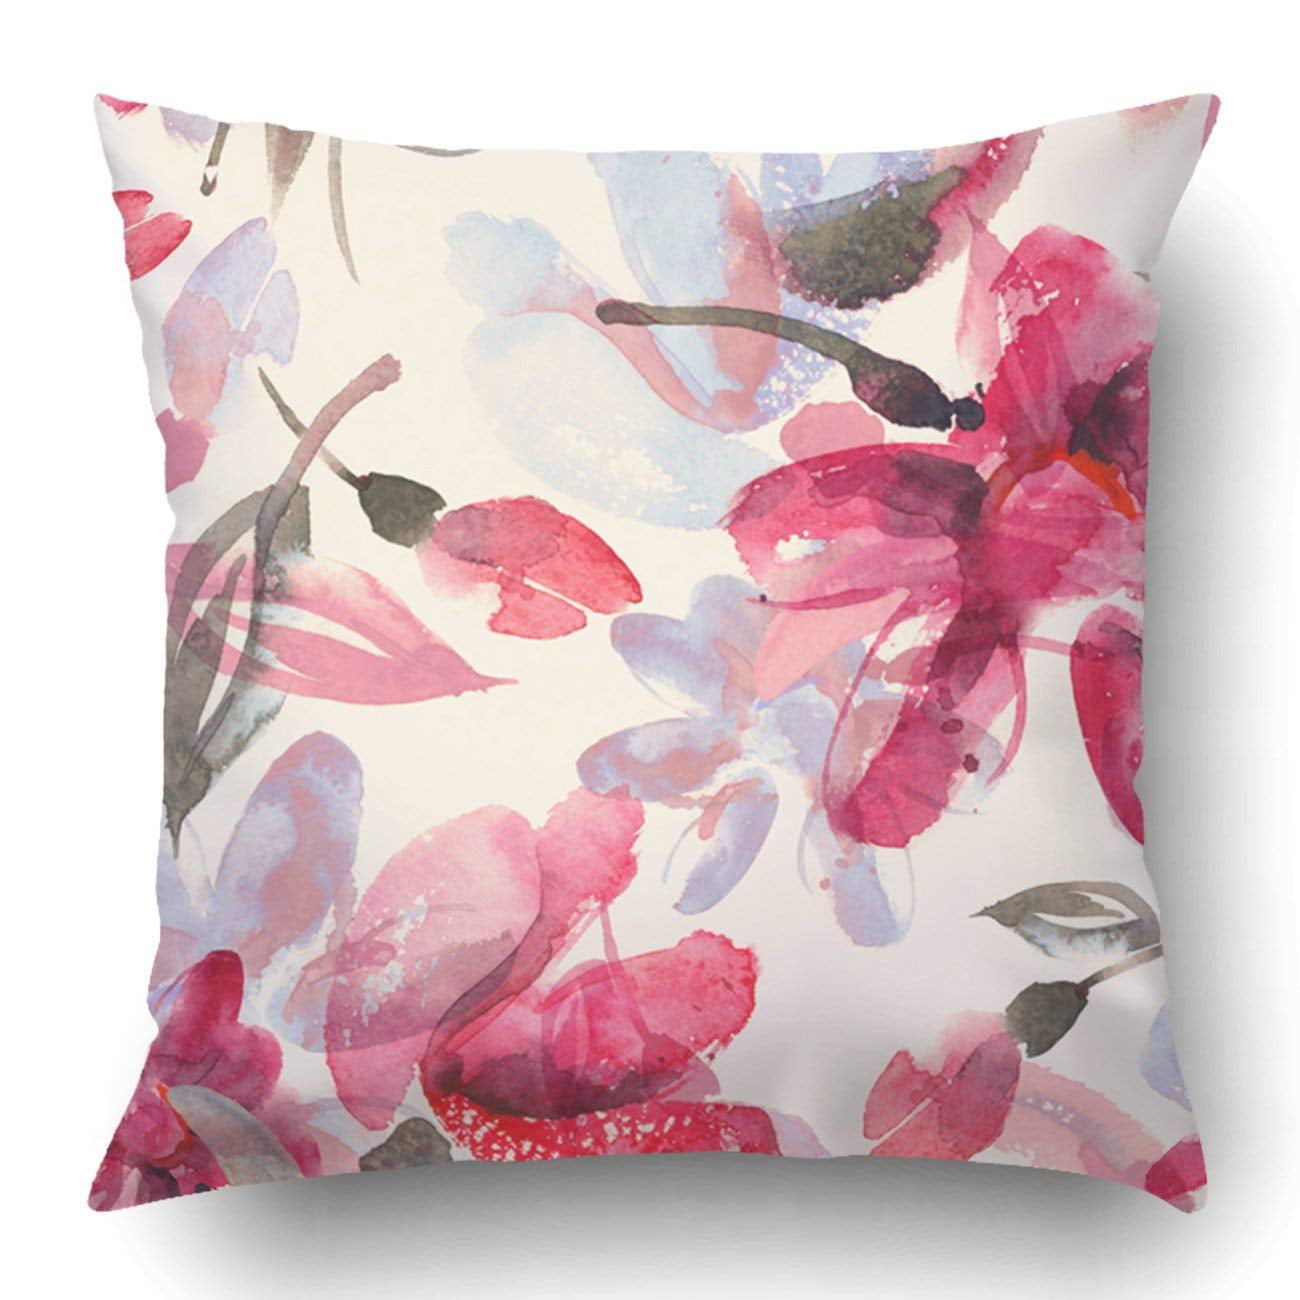 Watercolor Flower Pattern Decorative Throw Pillows Pillowcase Polyester Cushion